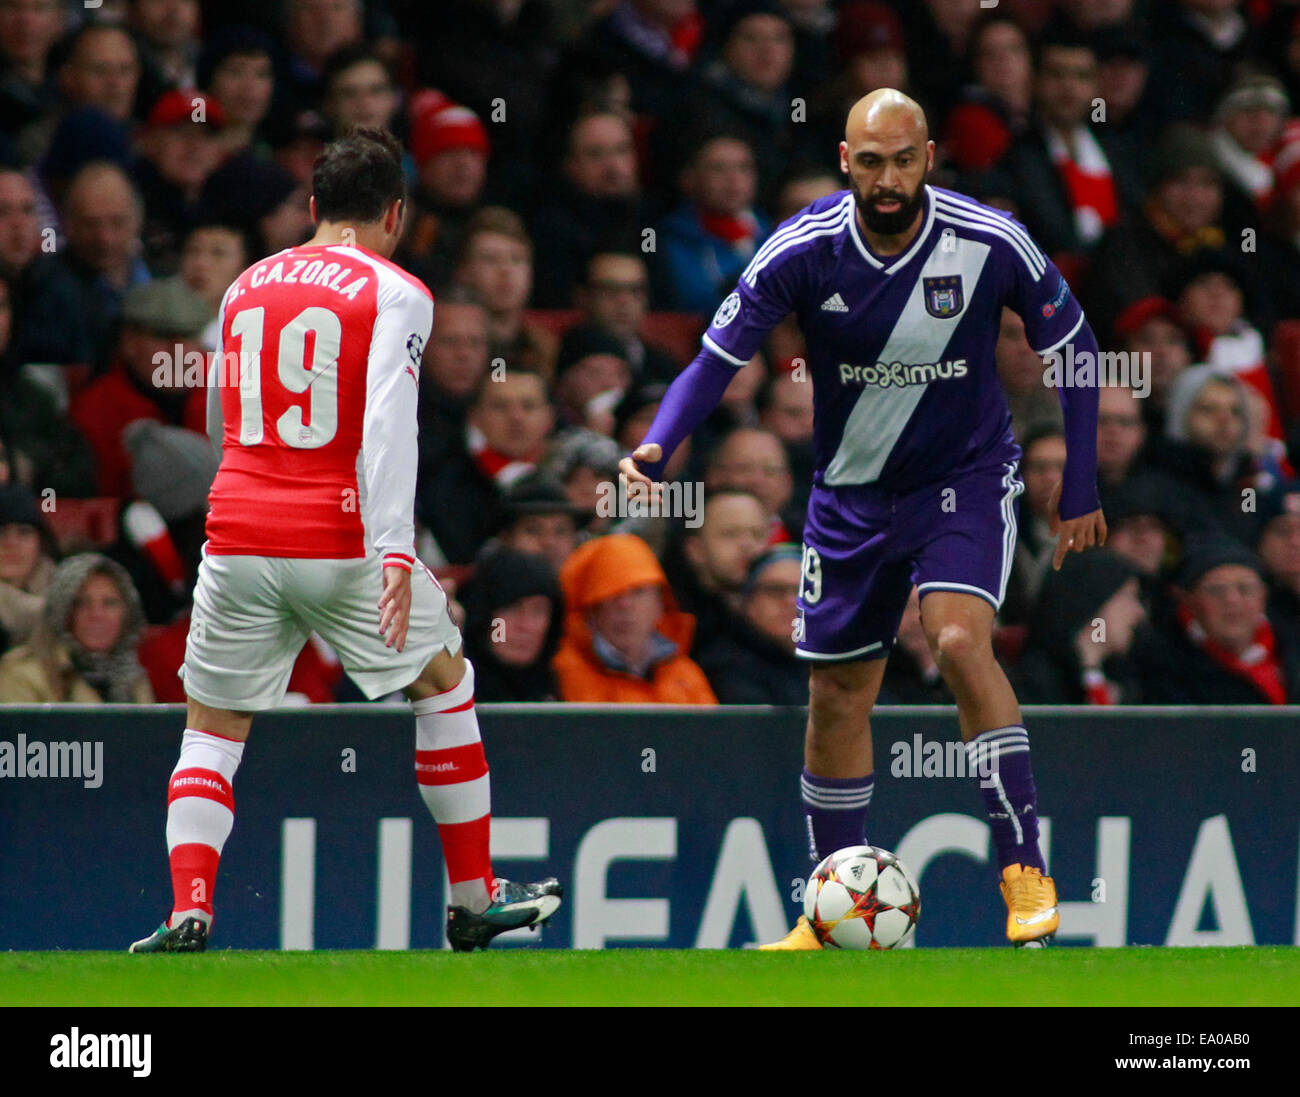 LONDON, ENGLAND - NOV 04: Arsenal's Santi Cazorla and Nathan Kabasele of Anderlecht during the UEFA Champions League match between Arsenal from England and Anderlecht from Belgium played at The Emirates Stadium, on November 04, 2014 in London, England. (Photo by Mitchell Gunn/ESPA) Stock Photo